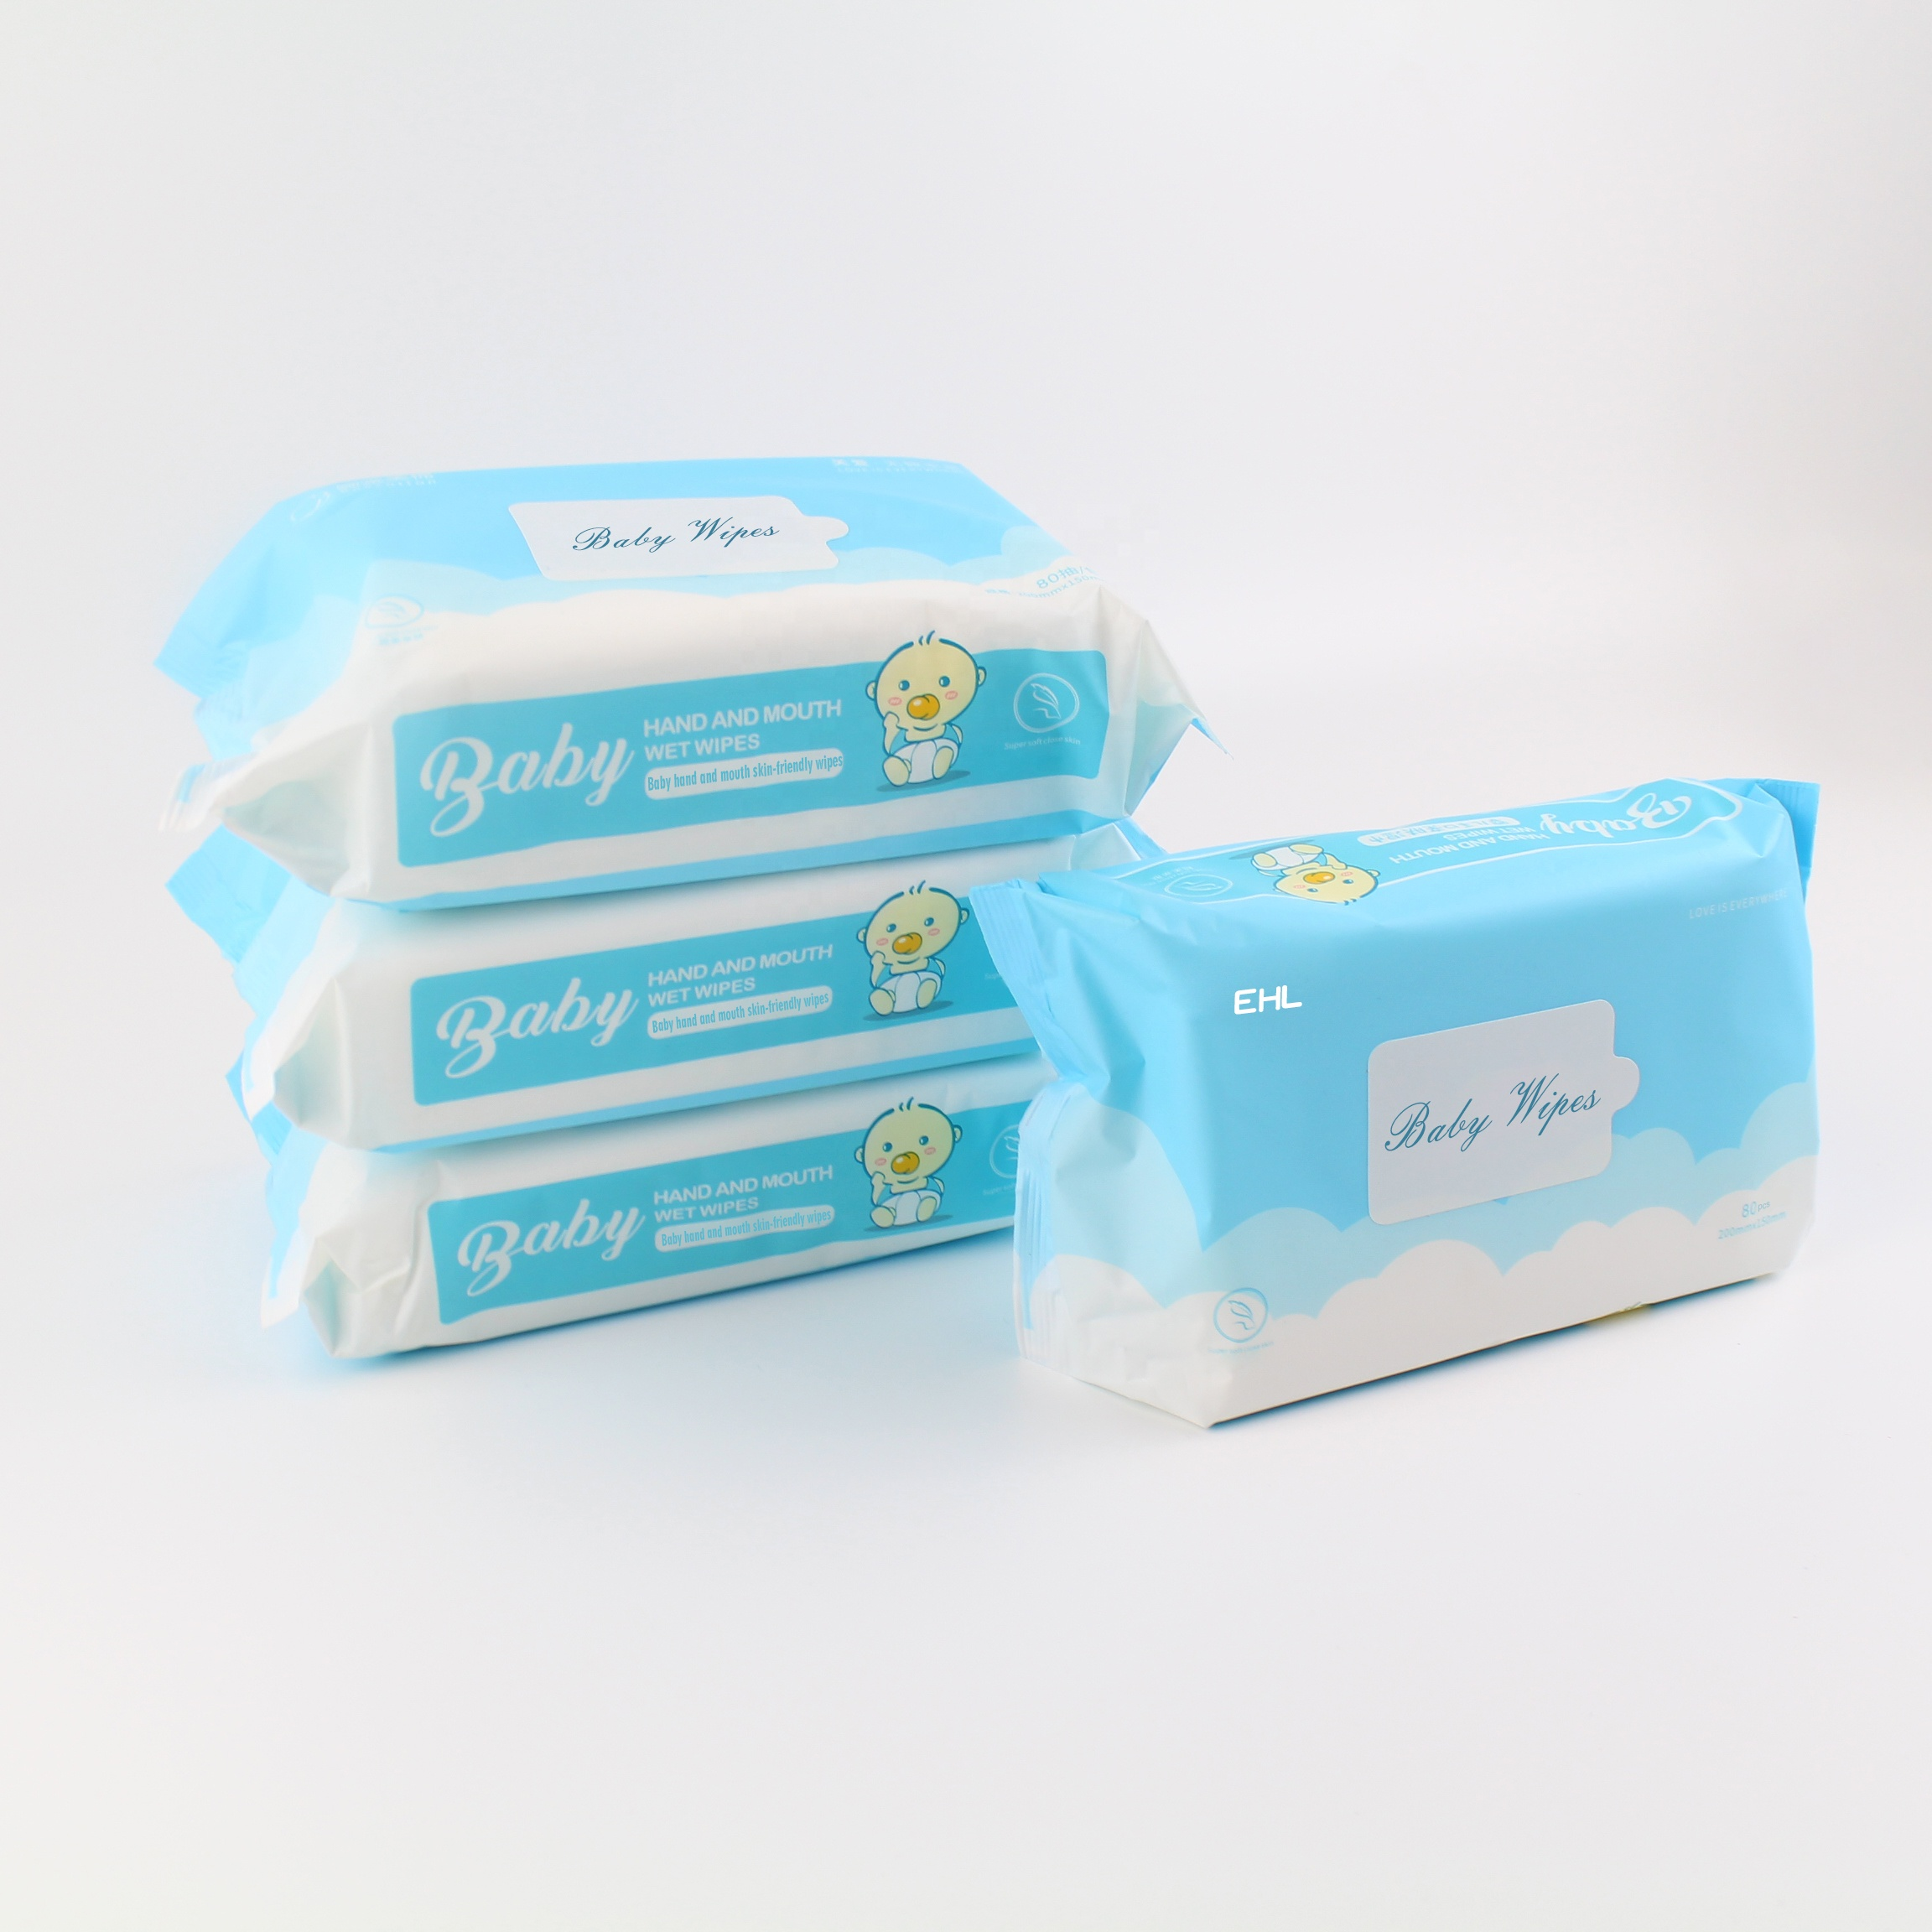 Baby Wet Wipes Manufacturer Non-Alcohol Water Wipes Mom's choice